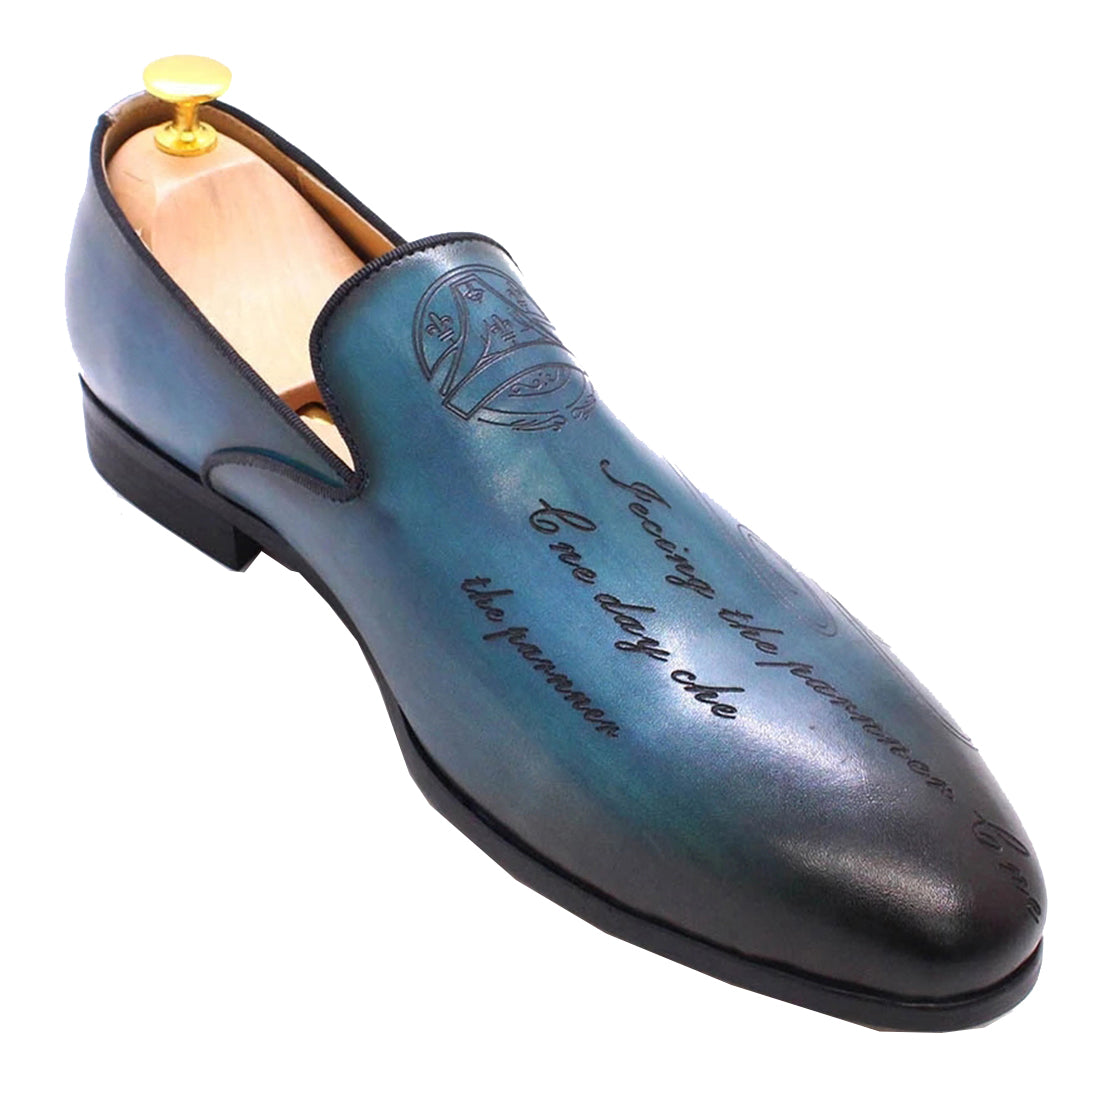 Men's Dress Formal Hand-Painted Penny Loafers